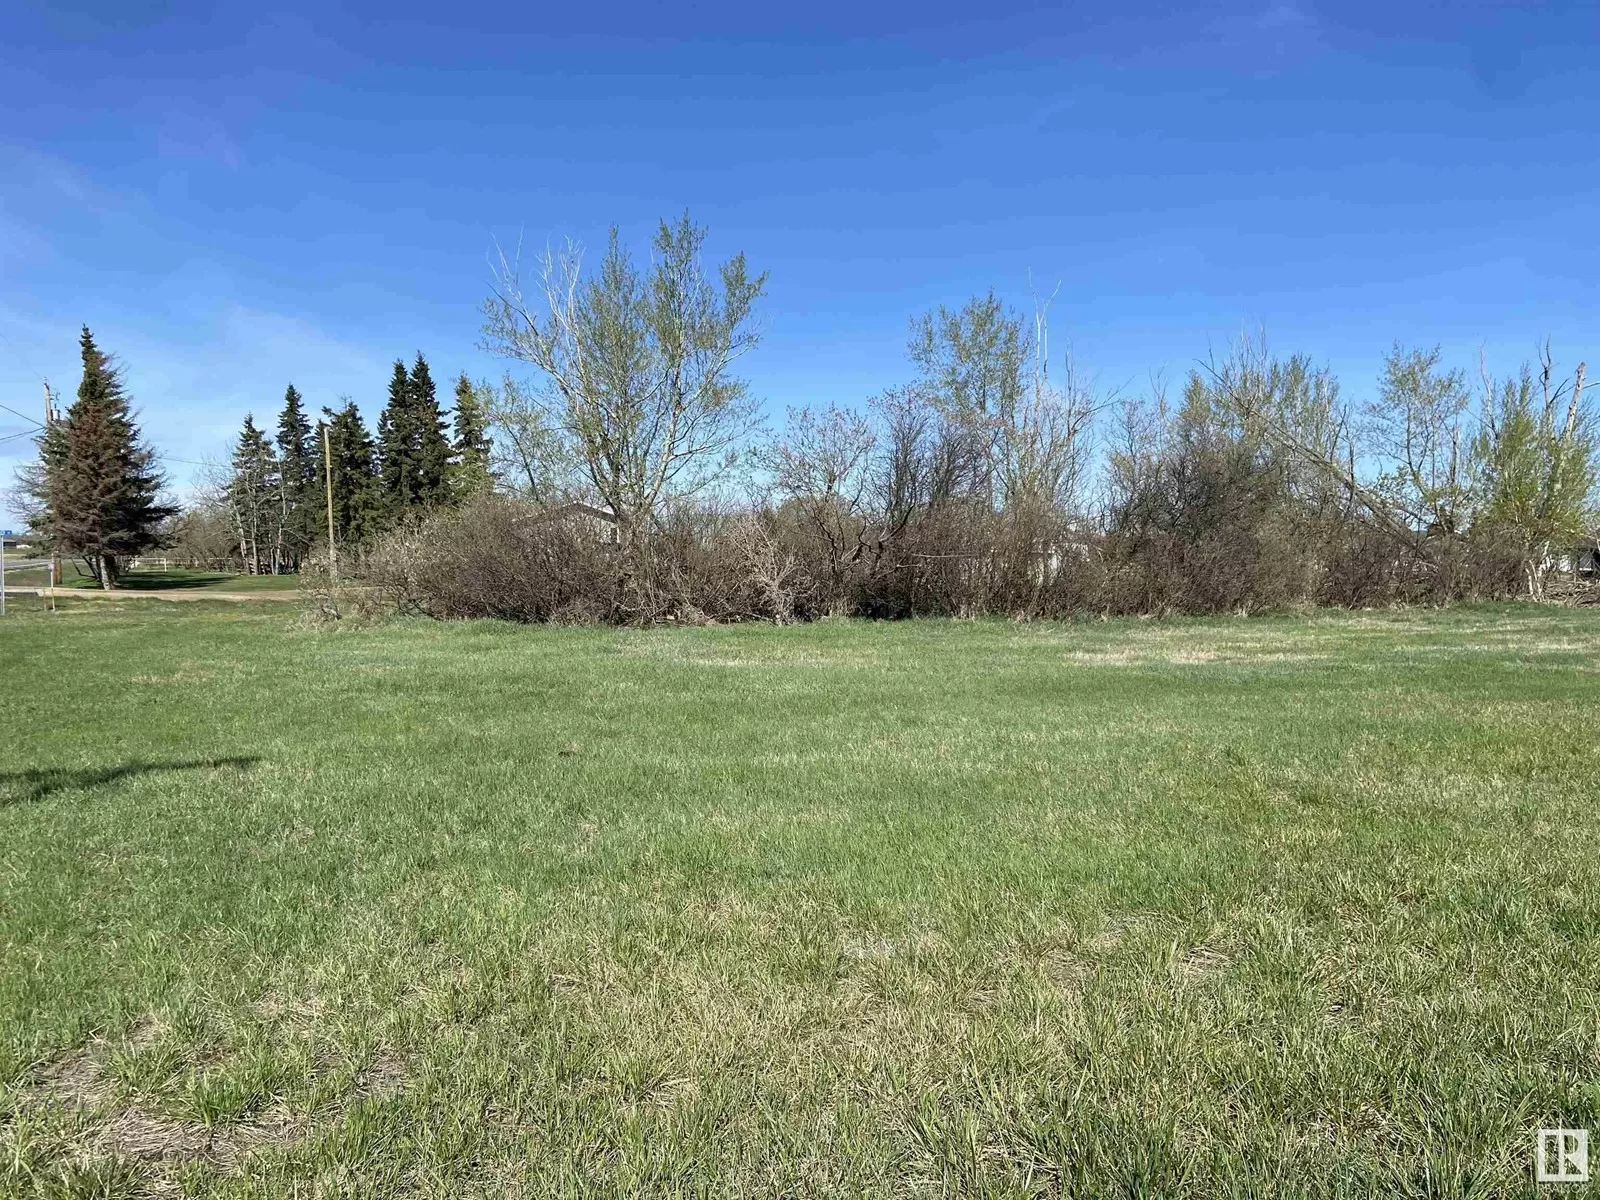 No Building for rent: #235 26500 Hwy 44, Riviere Qui Barre, Alberta T8R 0J3